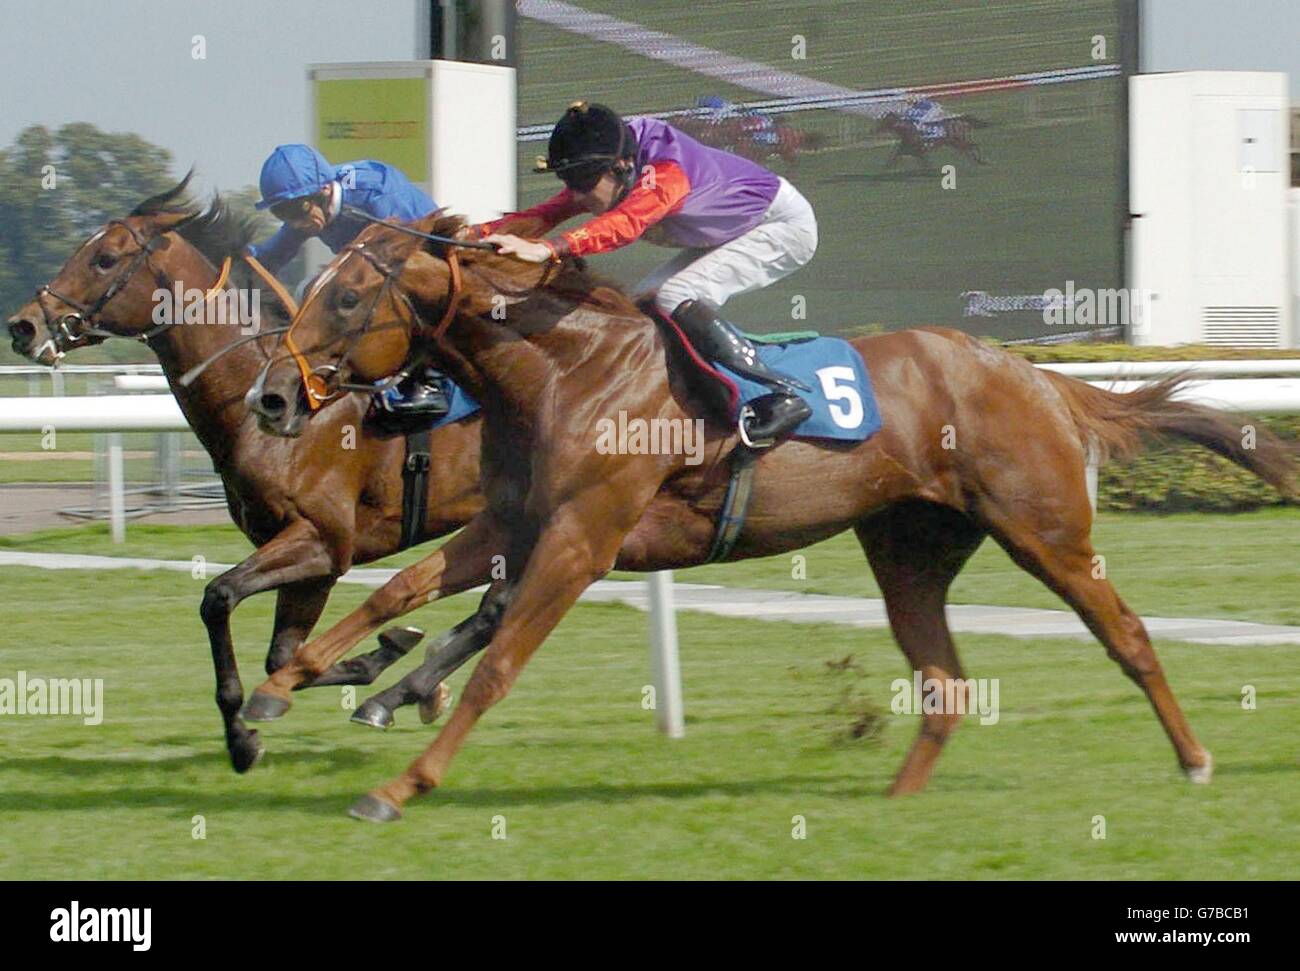 Humerous (blue) ridden by Frankie Dettori goes on to win the Rukba Senate Consulting E.B.F. Maiden Stakes Division Two at Kempton Park. Forward Move (5) ridden by Richard Hughes came second while Front Stage ridden by Kieren Fallon came third. Stock Photo